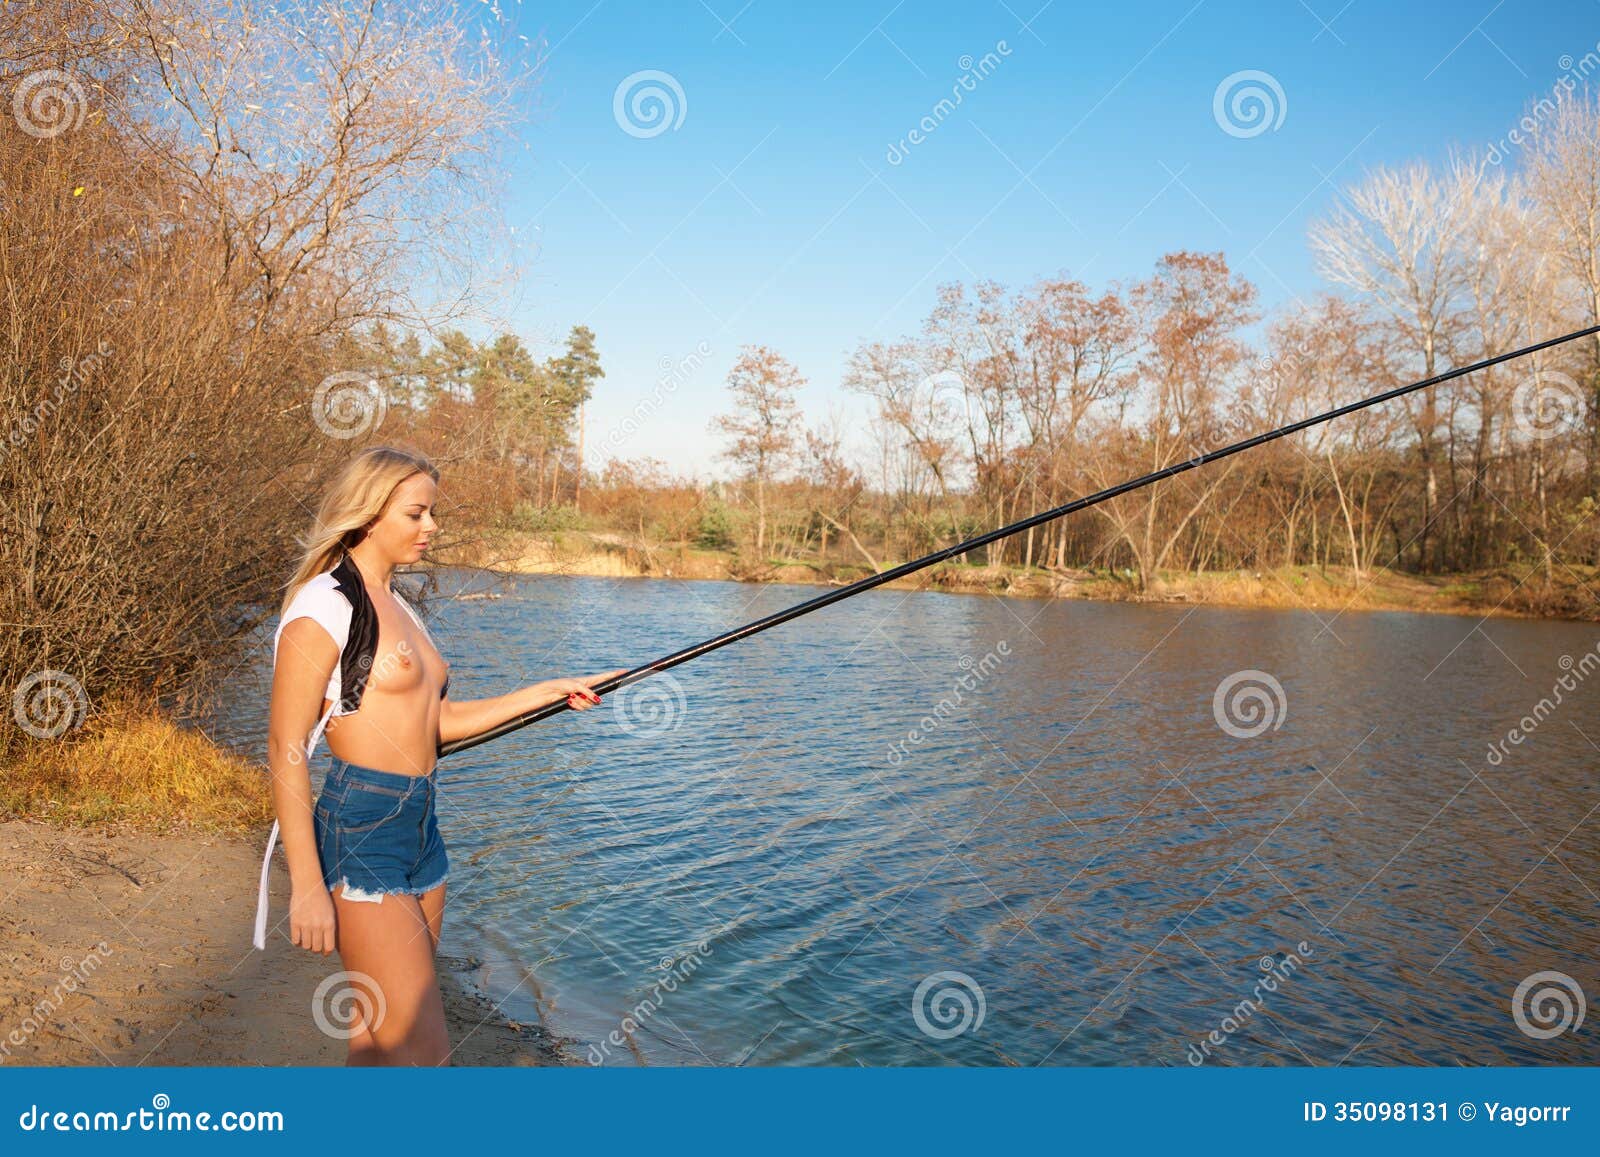 Topless Girl Fishing at the River Stock Image - Image of sunset